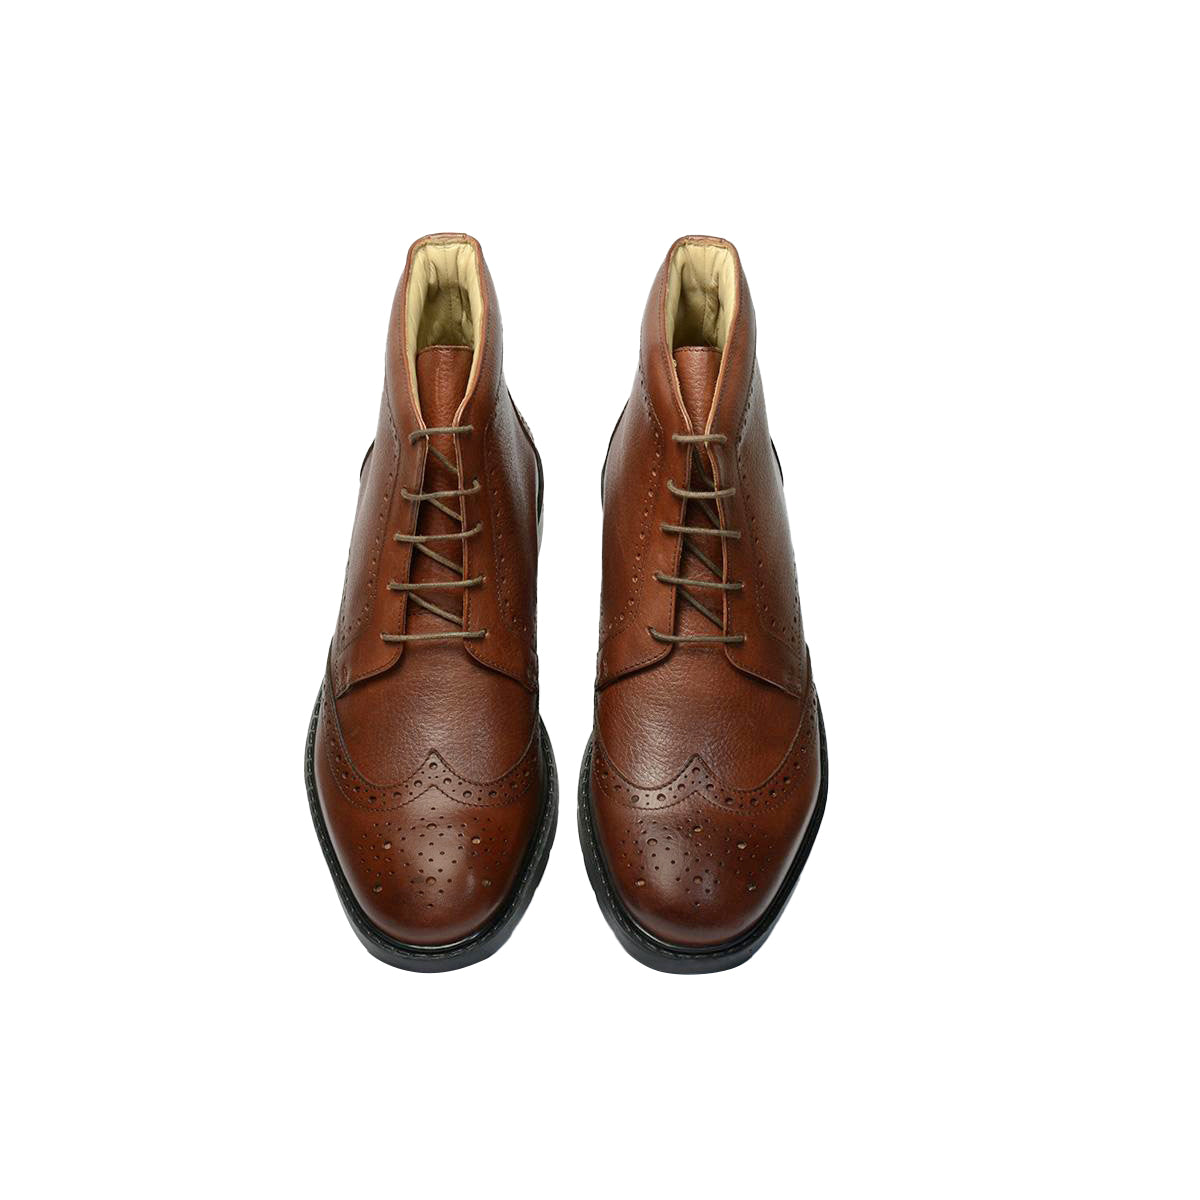 Men Leather Ankle Brogue Boots ǀ IMOLA 6257